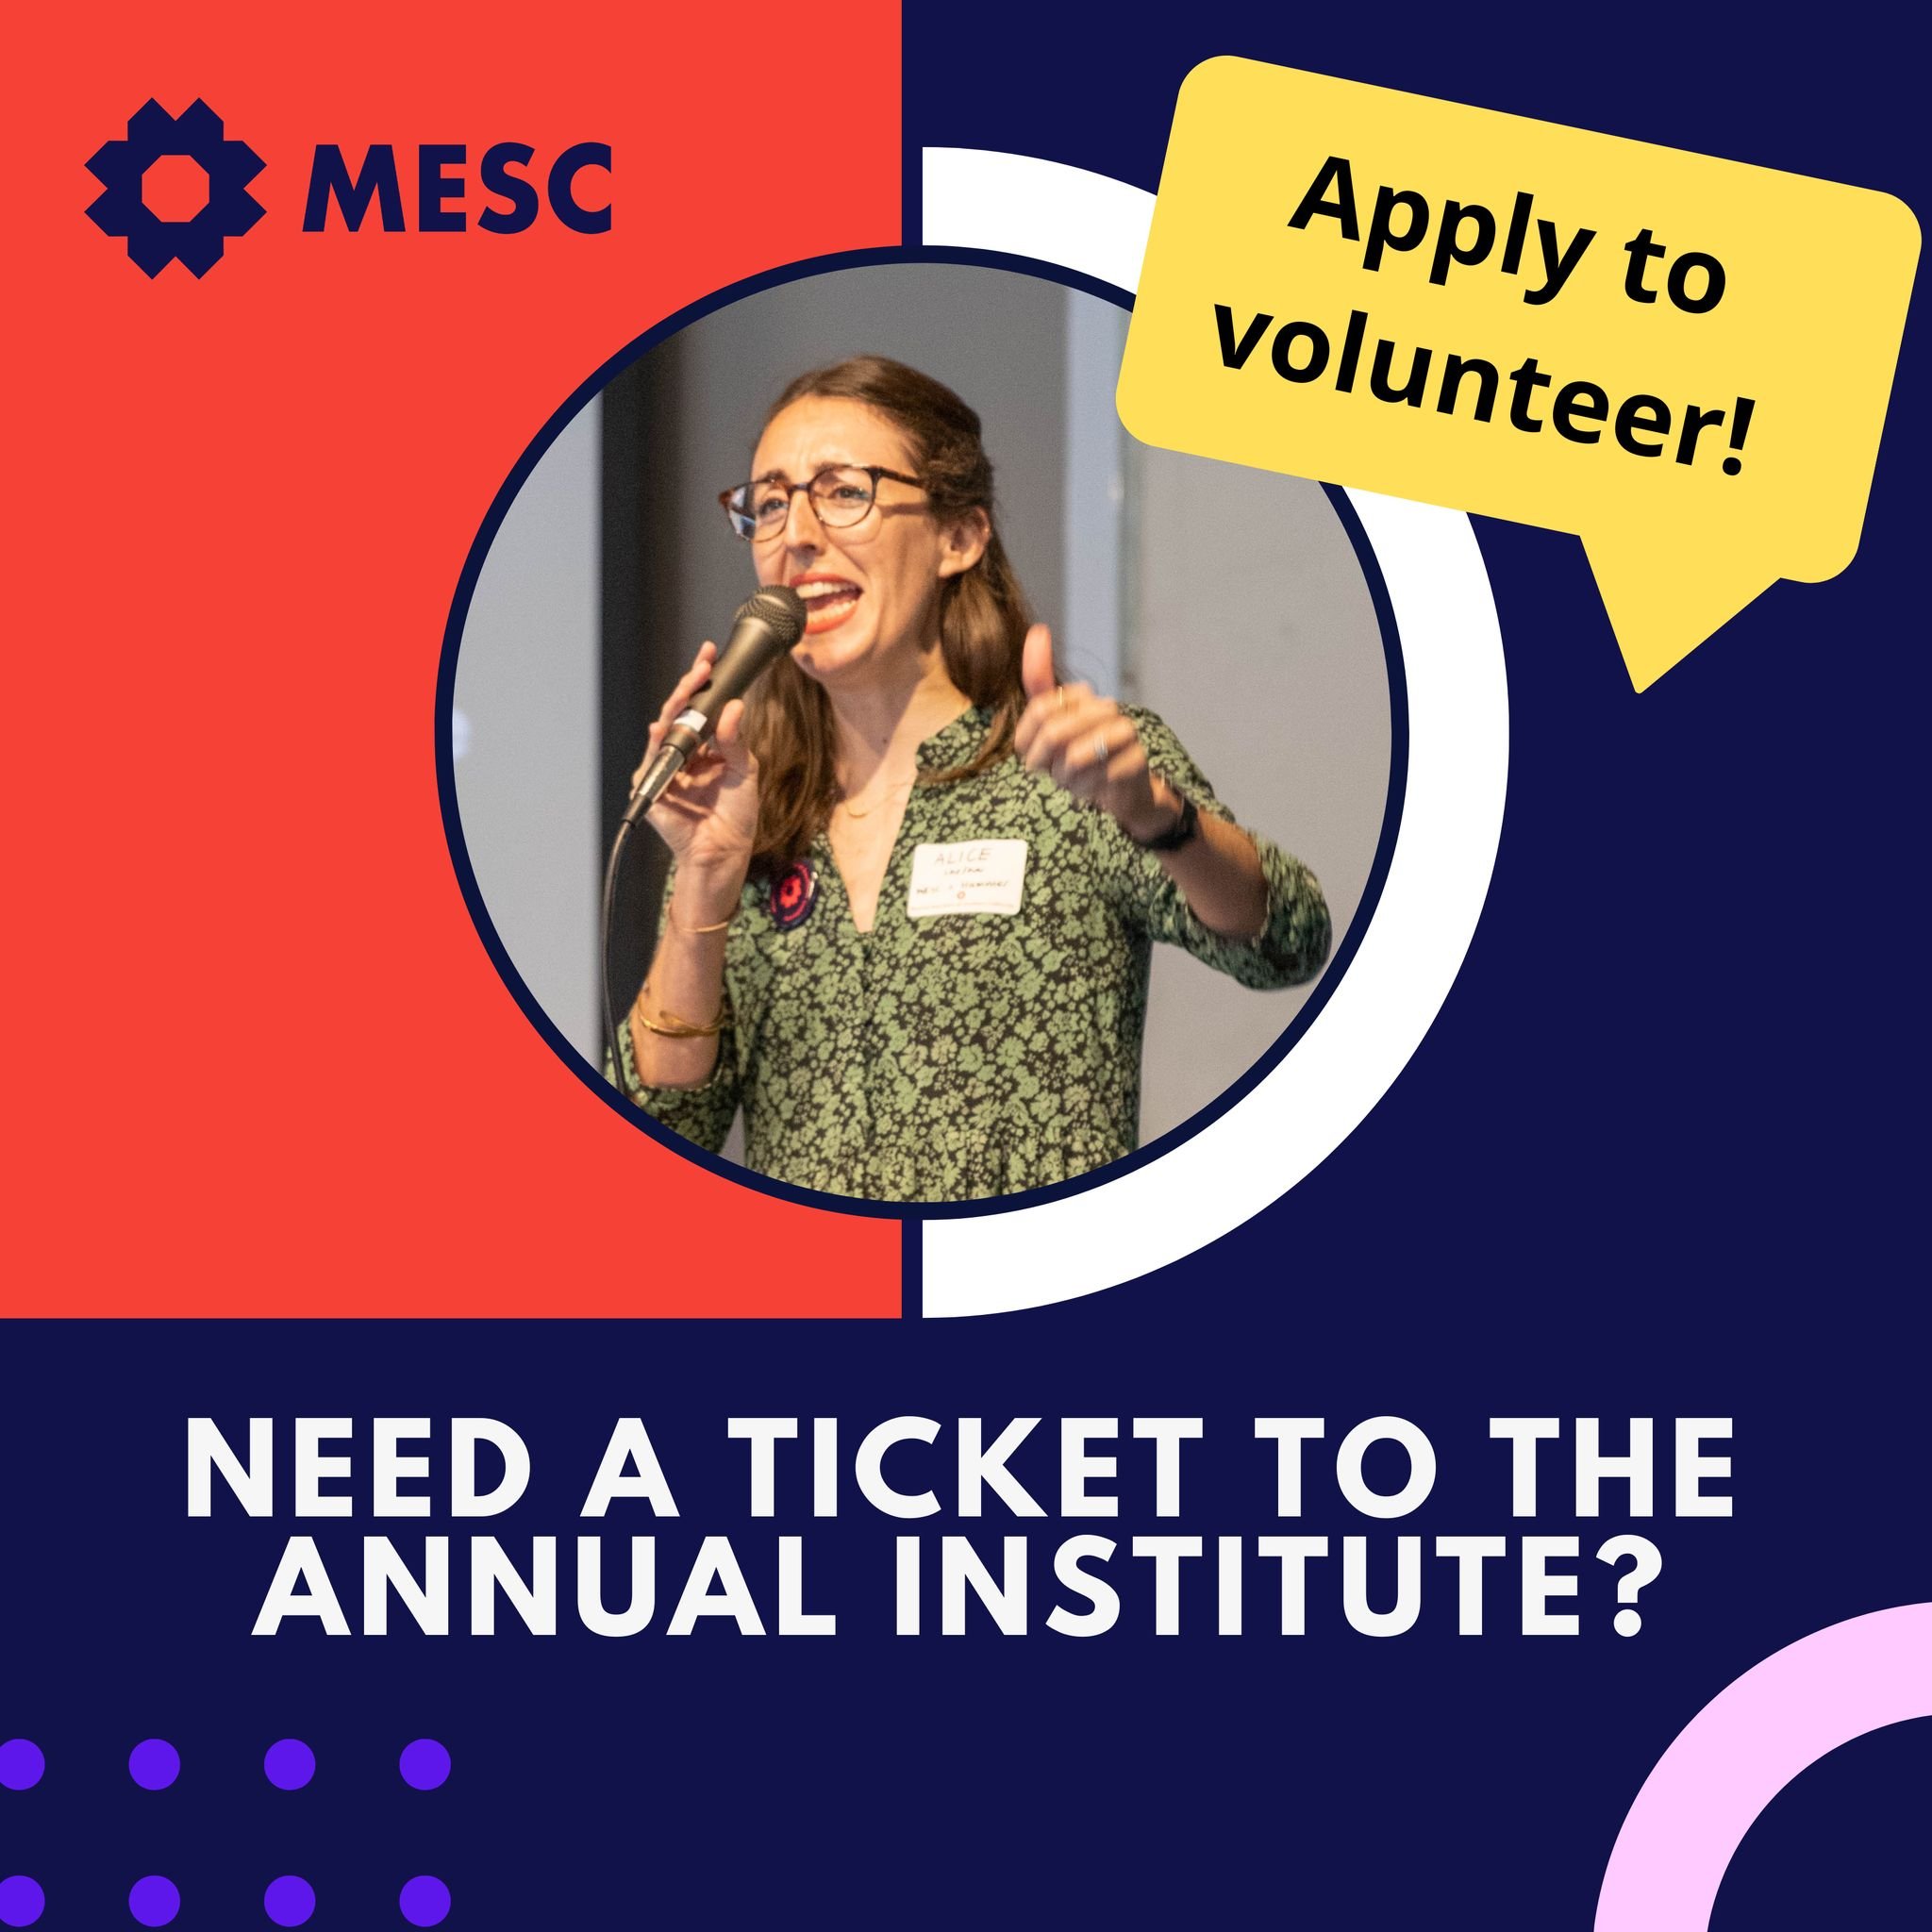 Calling all volunteers! Don't miss your chance to attend the Annual Institute with our scholarship tickets! Each ticket includes morning refreshments, lunch, access to the keynote address, participation in breakout sessions, and the opportunity to su